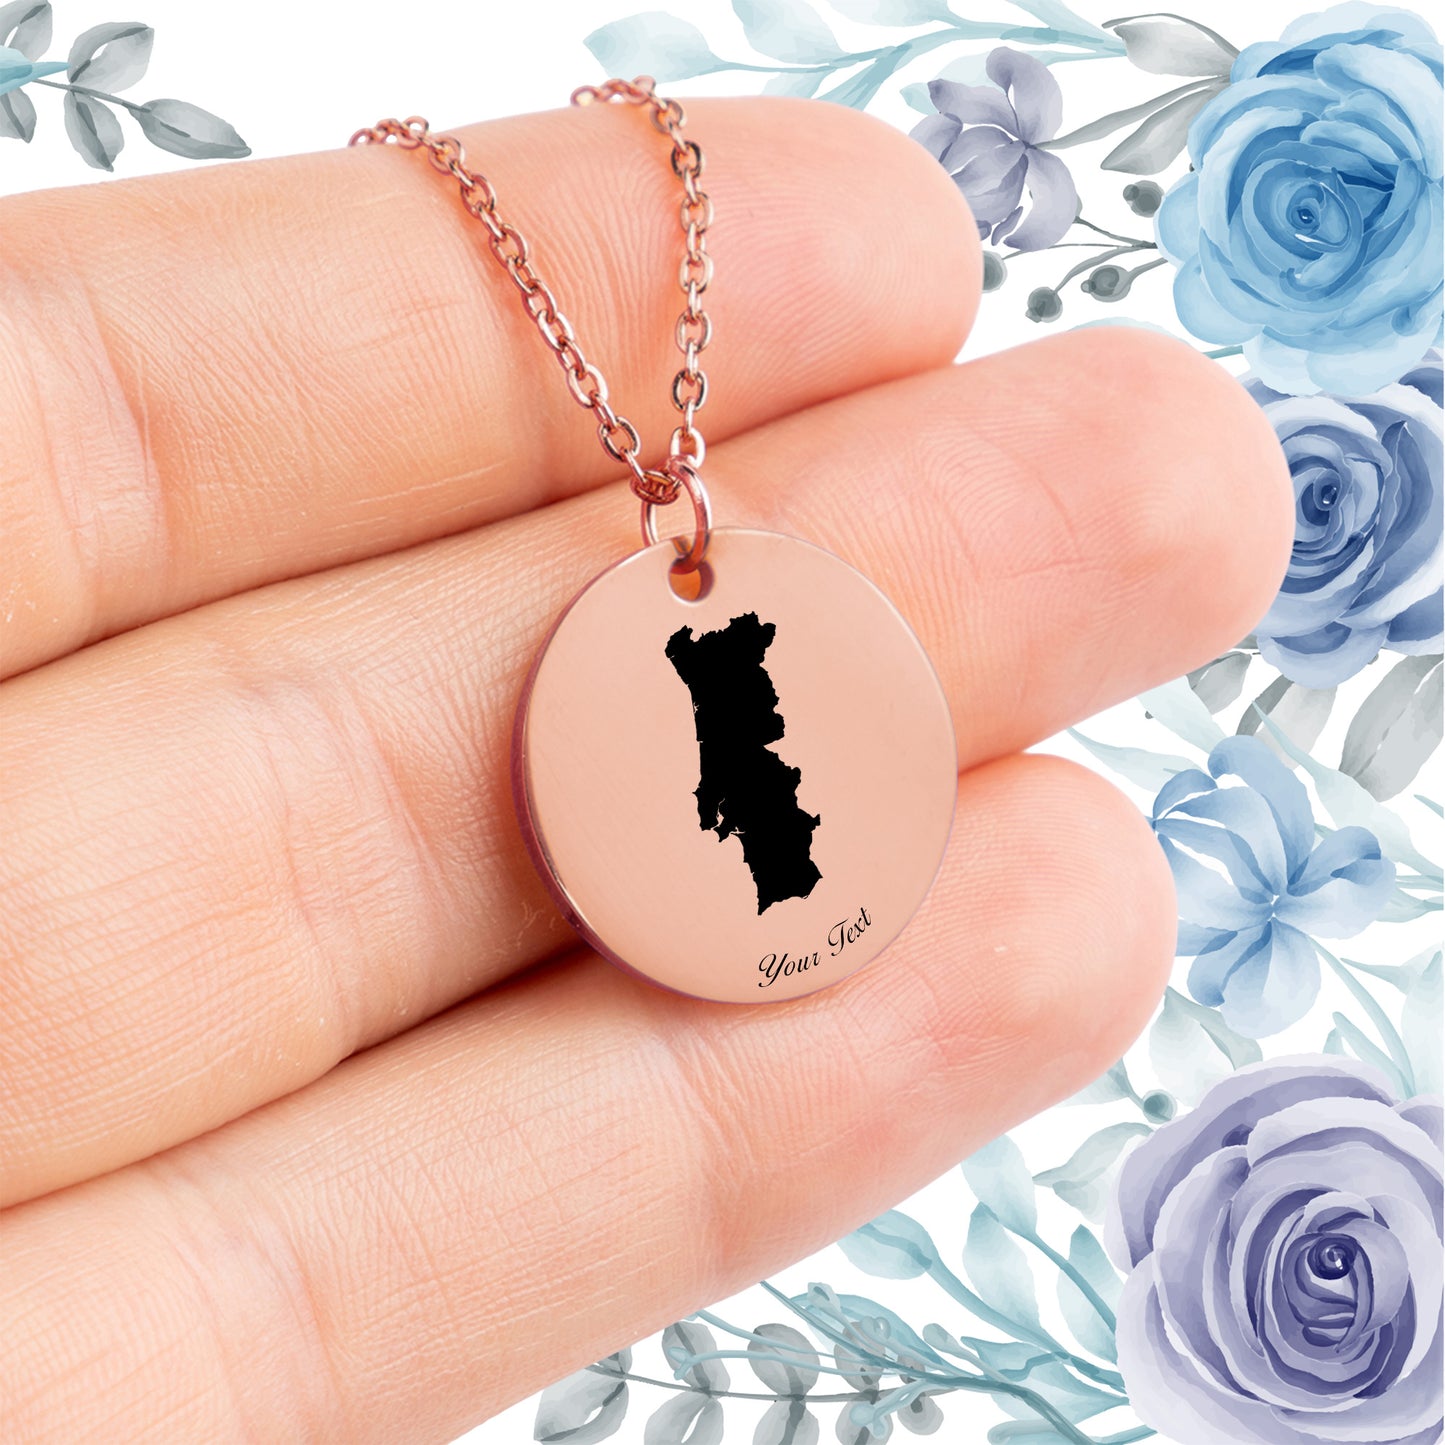 Portugal Country Map Necklace - Personalizable Jewelry